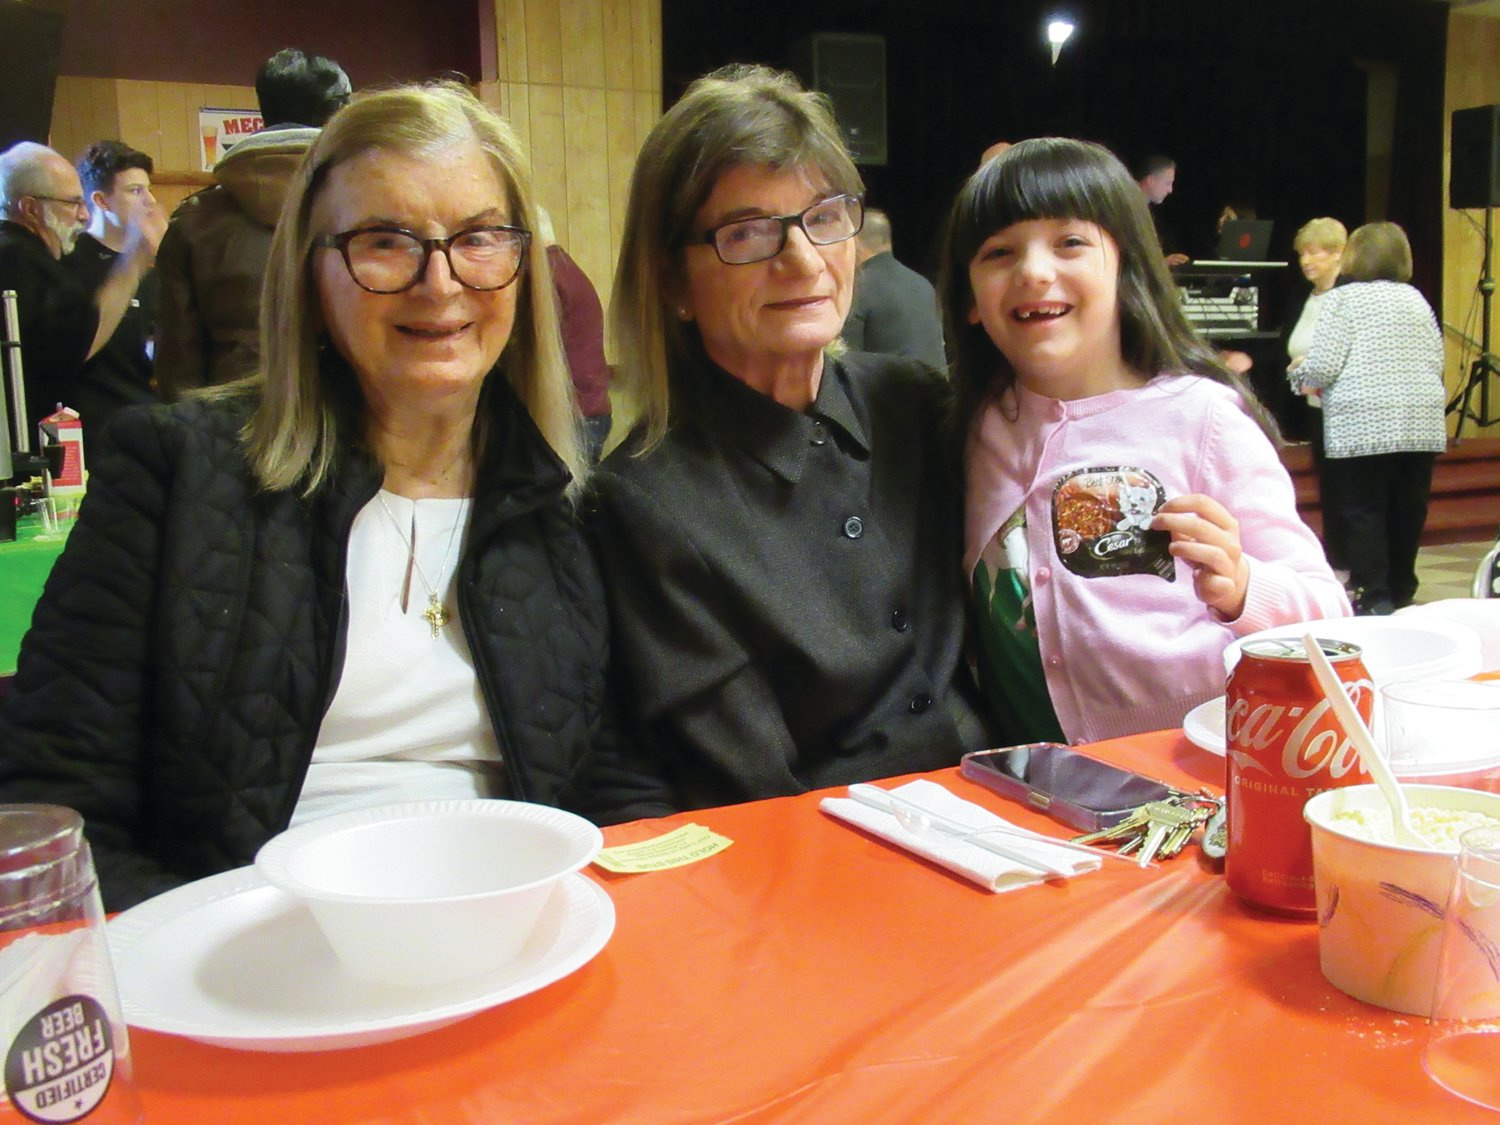 FAMILY FEAST: Marysue Andreozzi, member of the Johnston School Committee and Vilma Zanni brought Maryrose Andreozzi to Saturday’s annual OLG St. Joseph’s Table event.